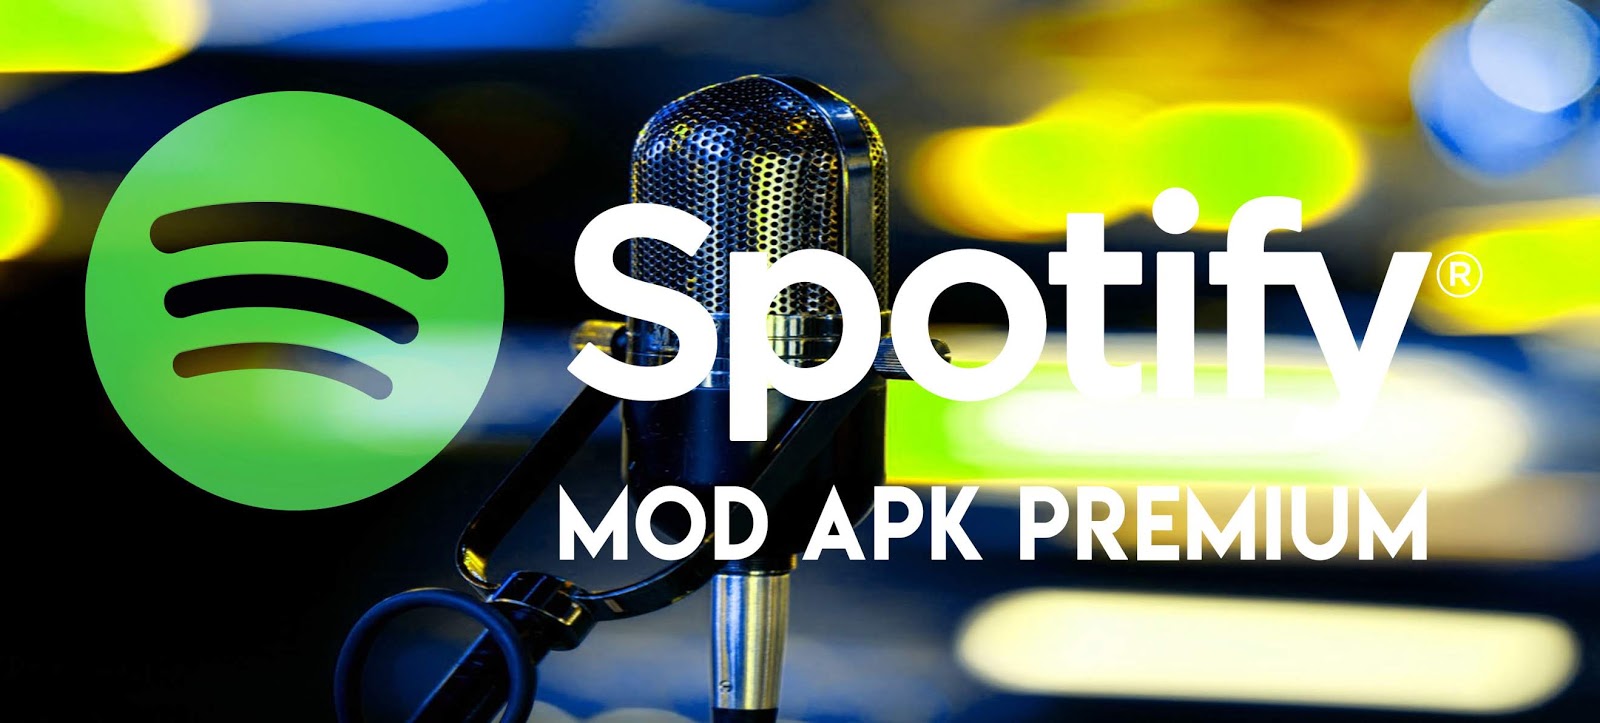 Download the Latest Version of Spotify Premium Apk Mod 2020 | Free